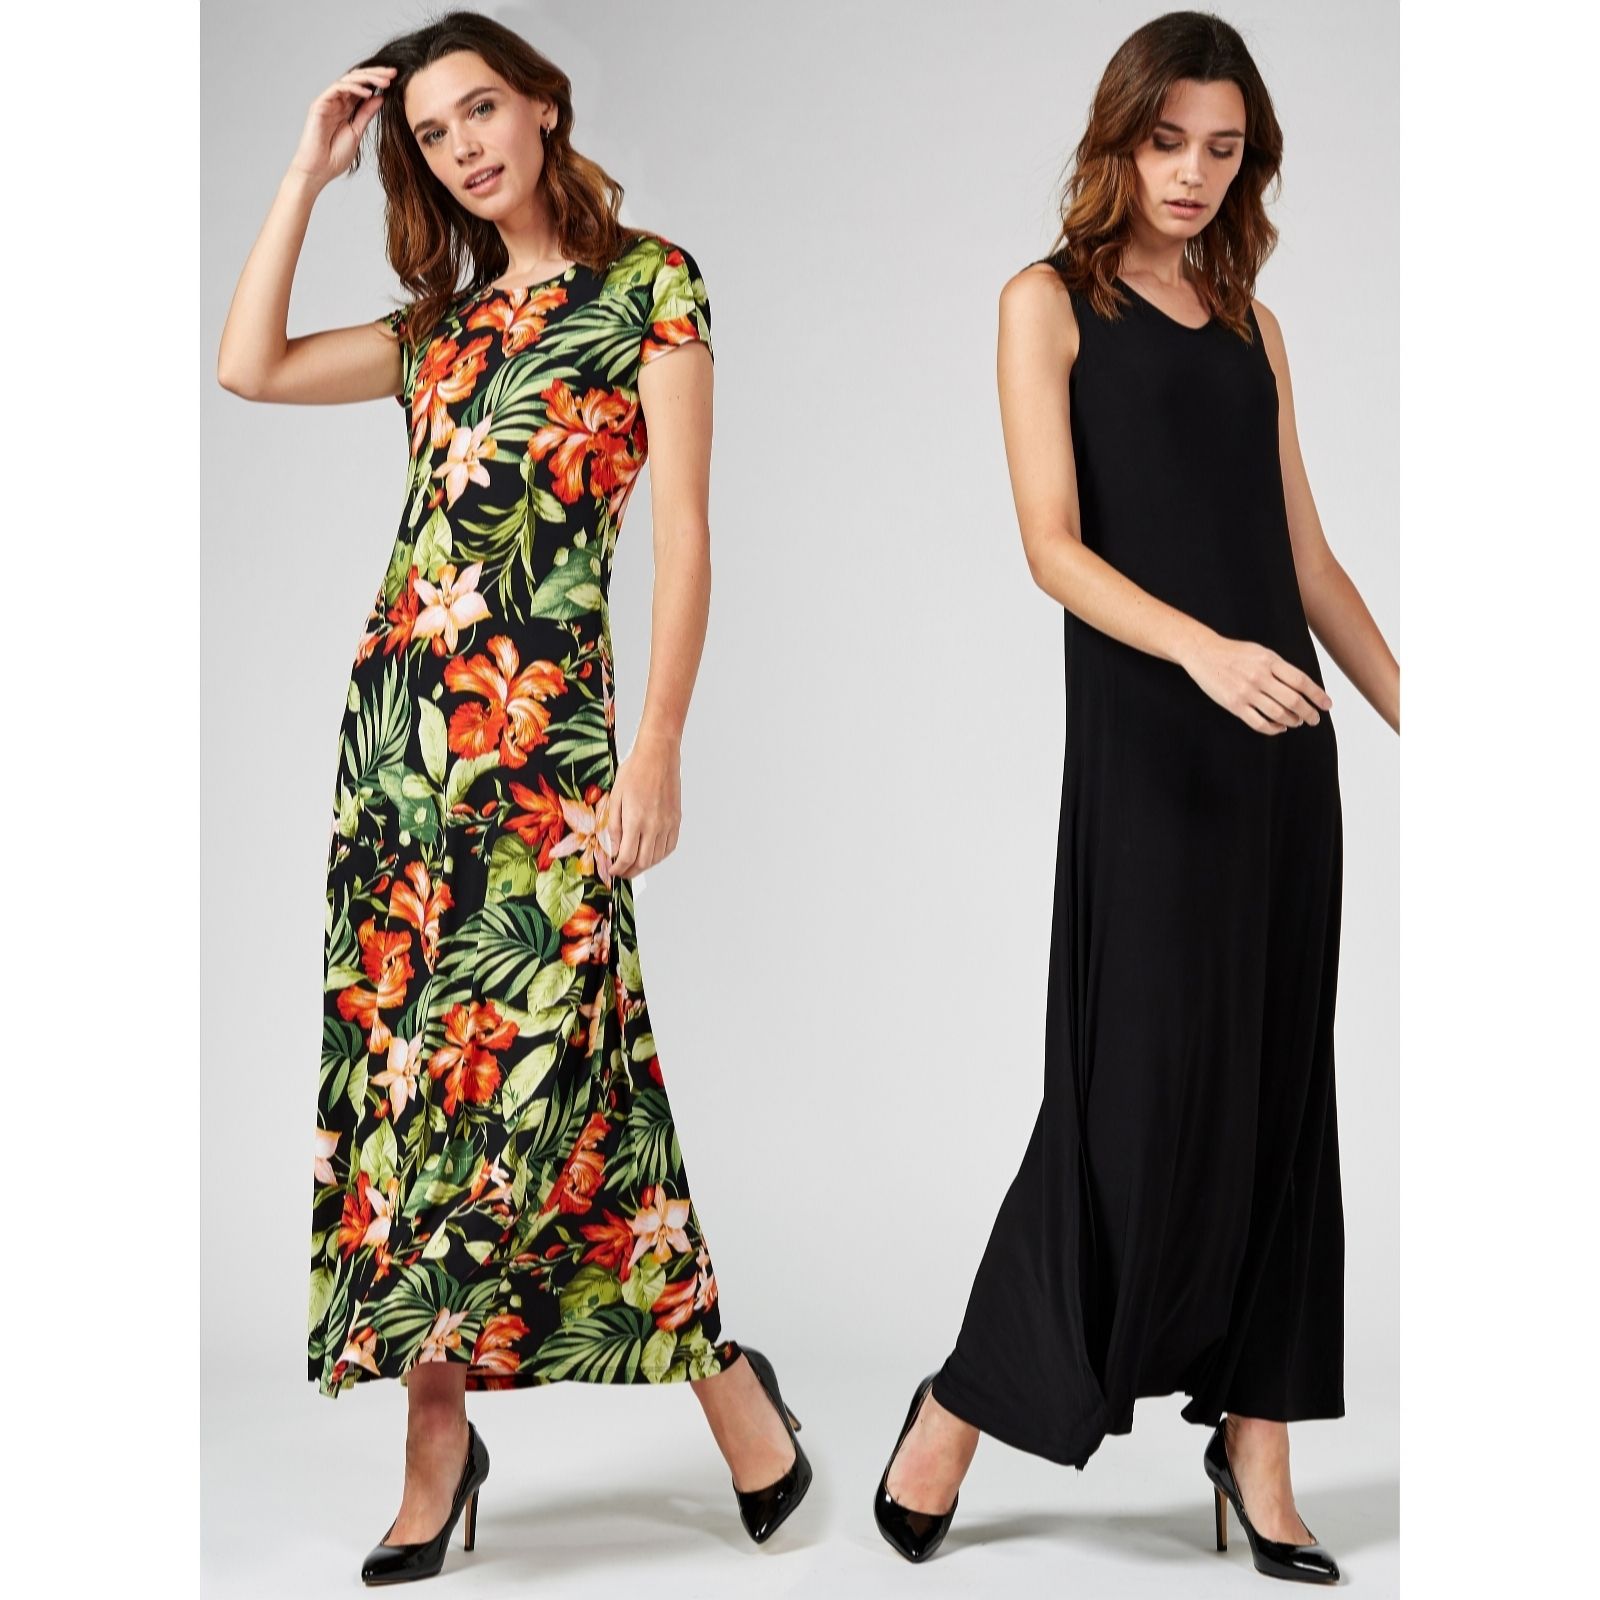 Attitudes by Renee Set of Two Print and Plain Maxi Dresses